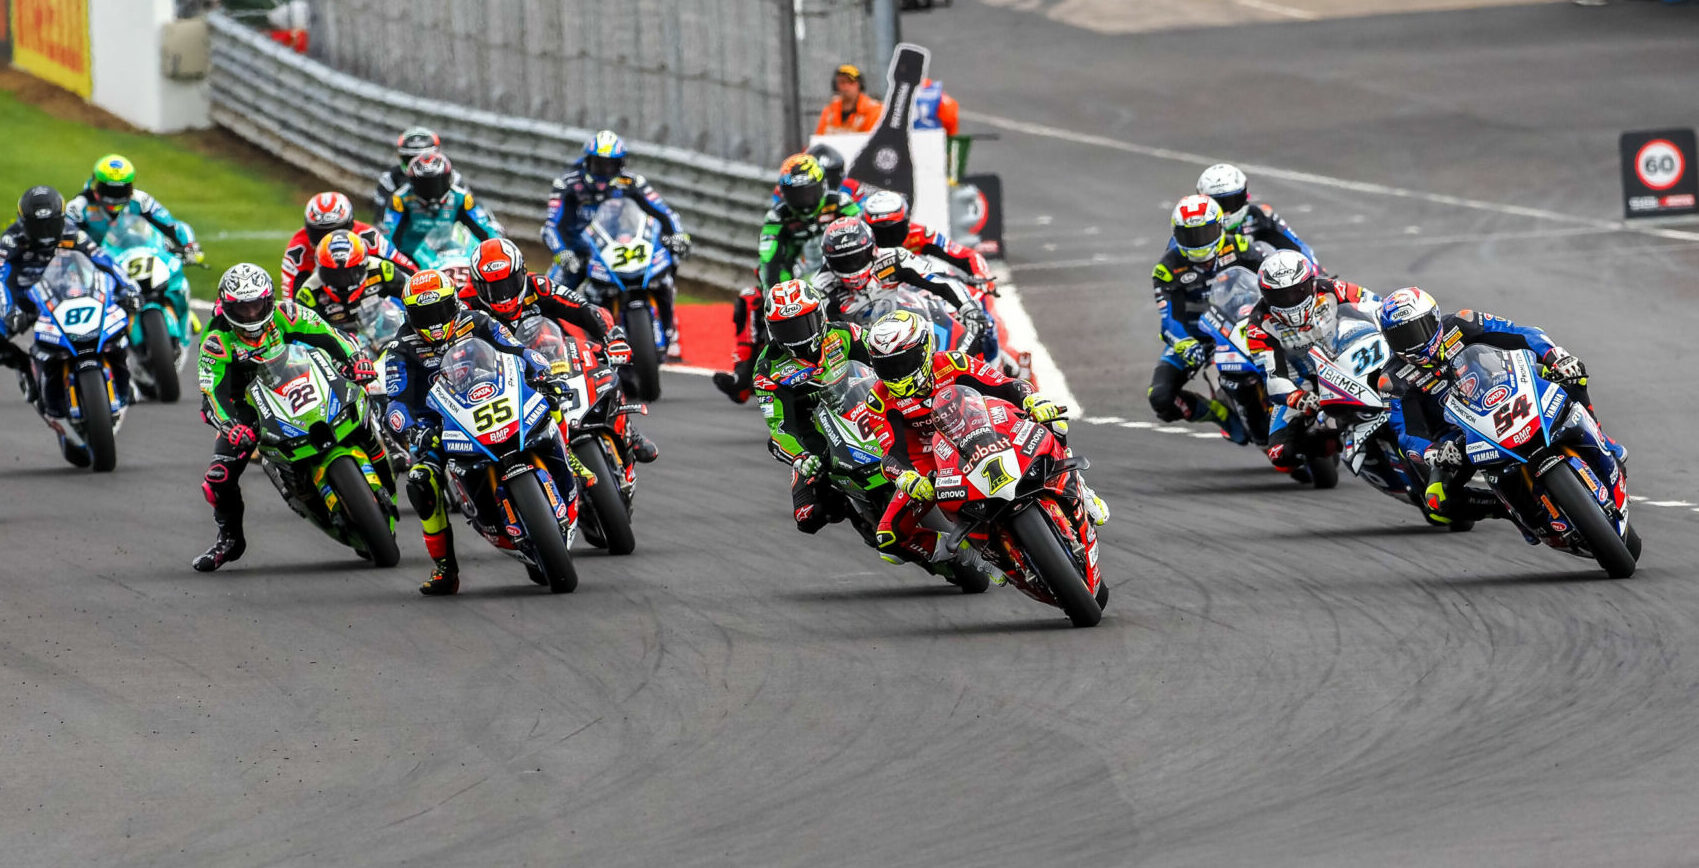 WorldSBK CNBC Airing Race Two From Imola On July 16